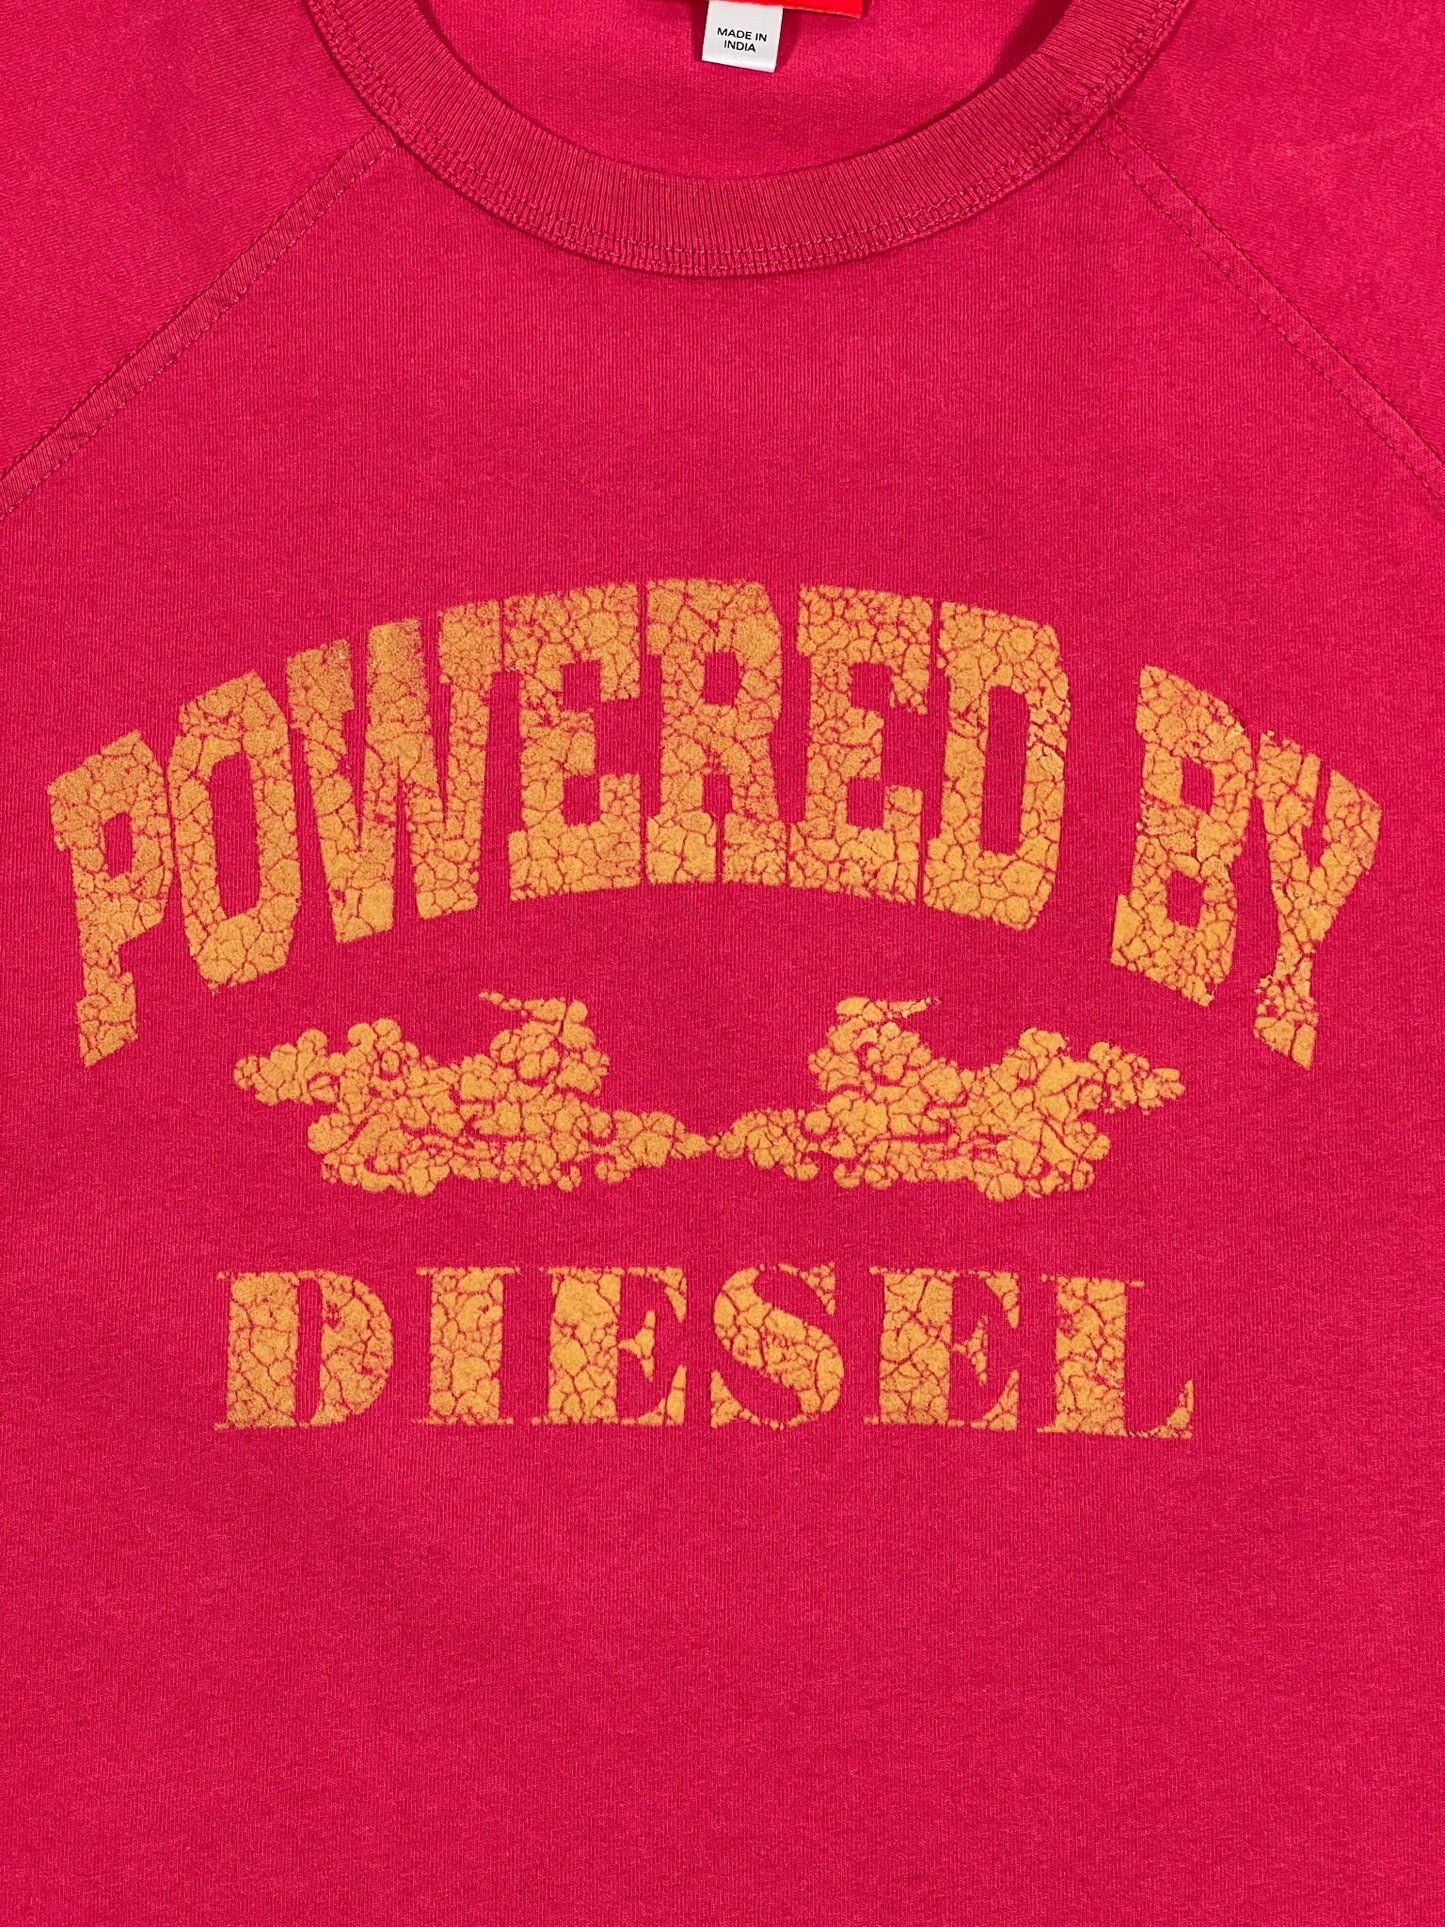 Pink DIESEL T-RUST t-shirt with the phrase "powered by diesel" printed in yellow text with a distressed look.